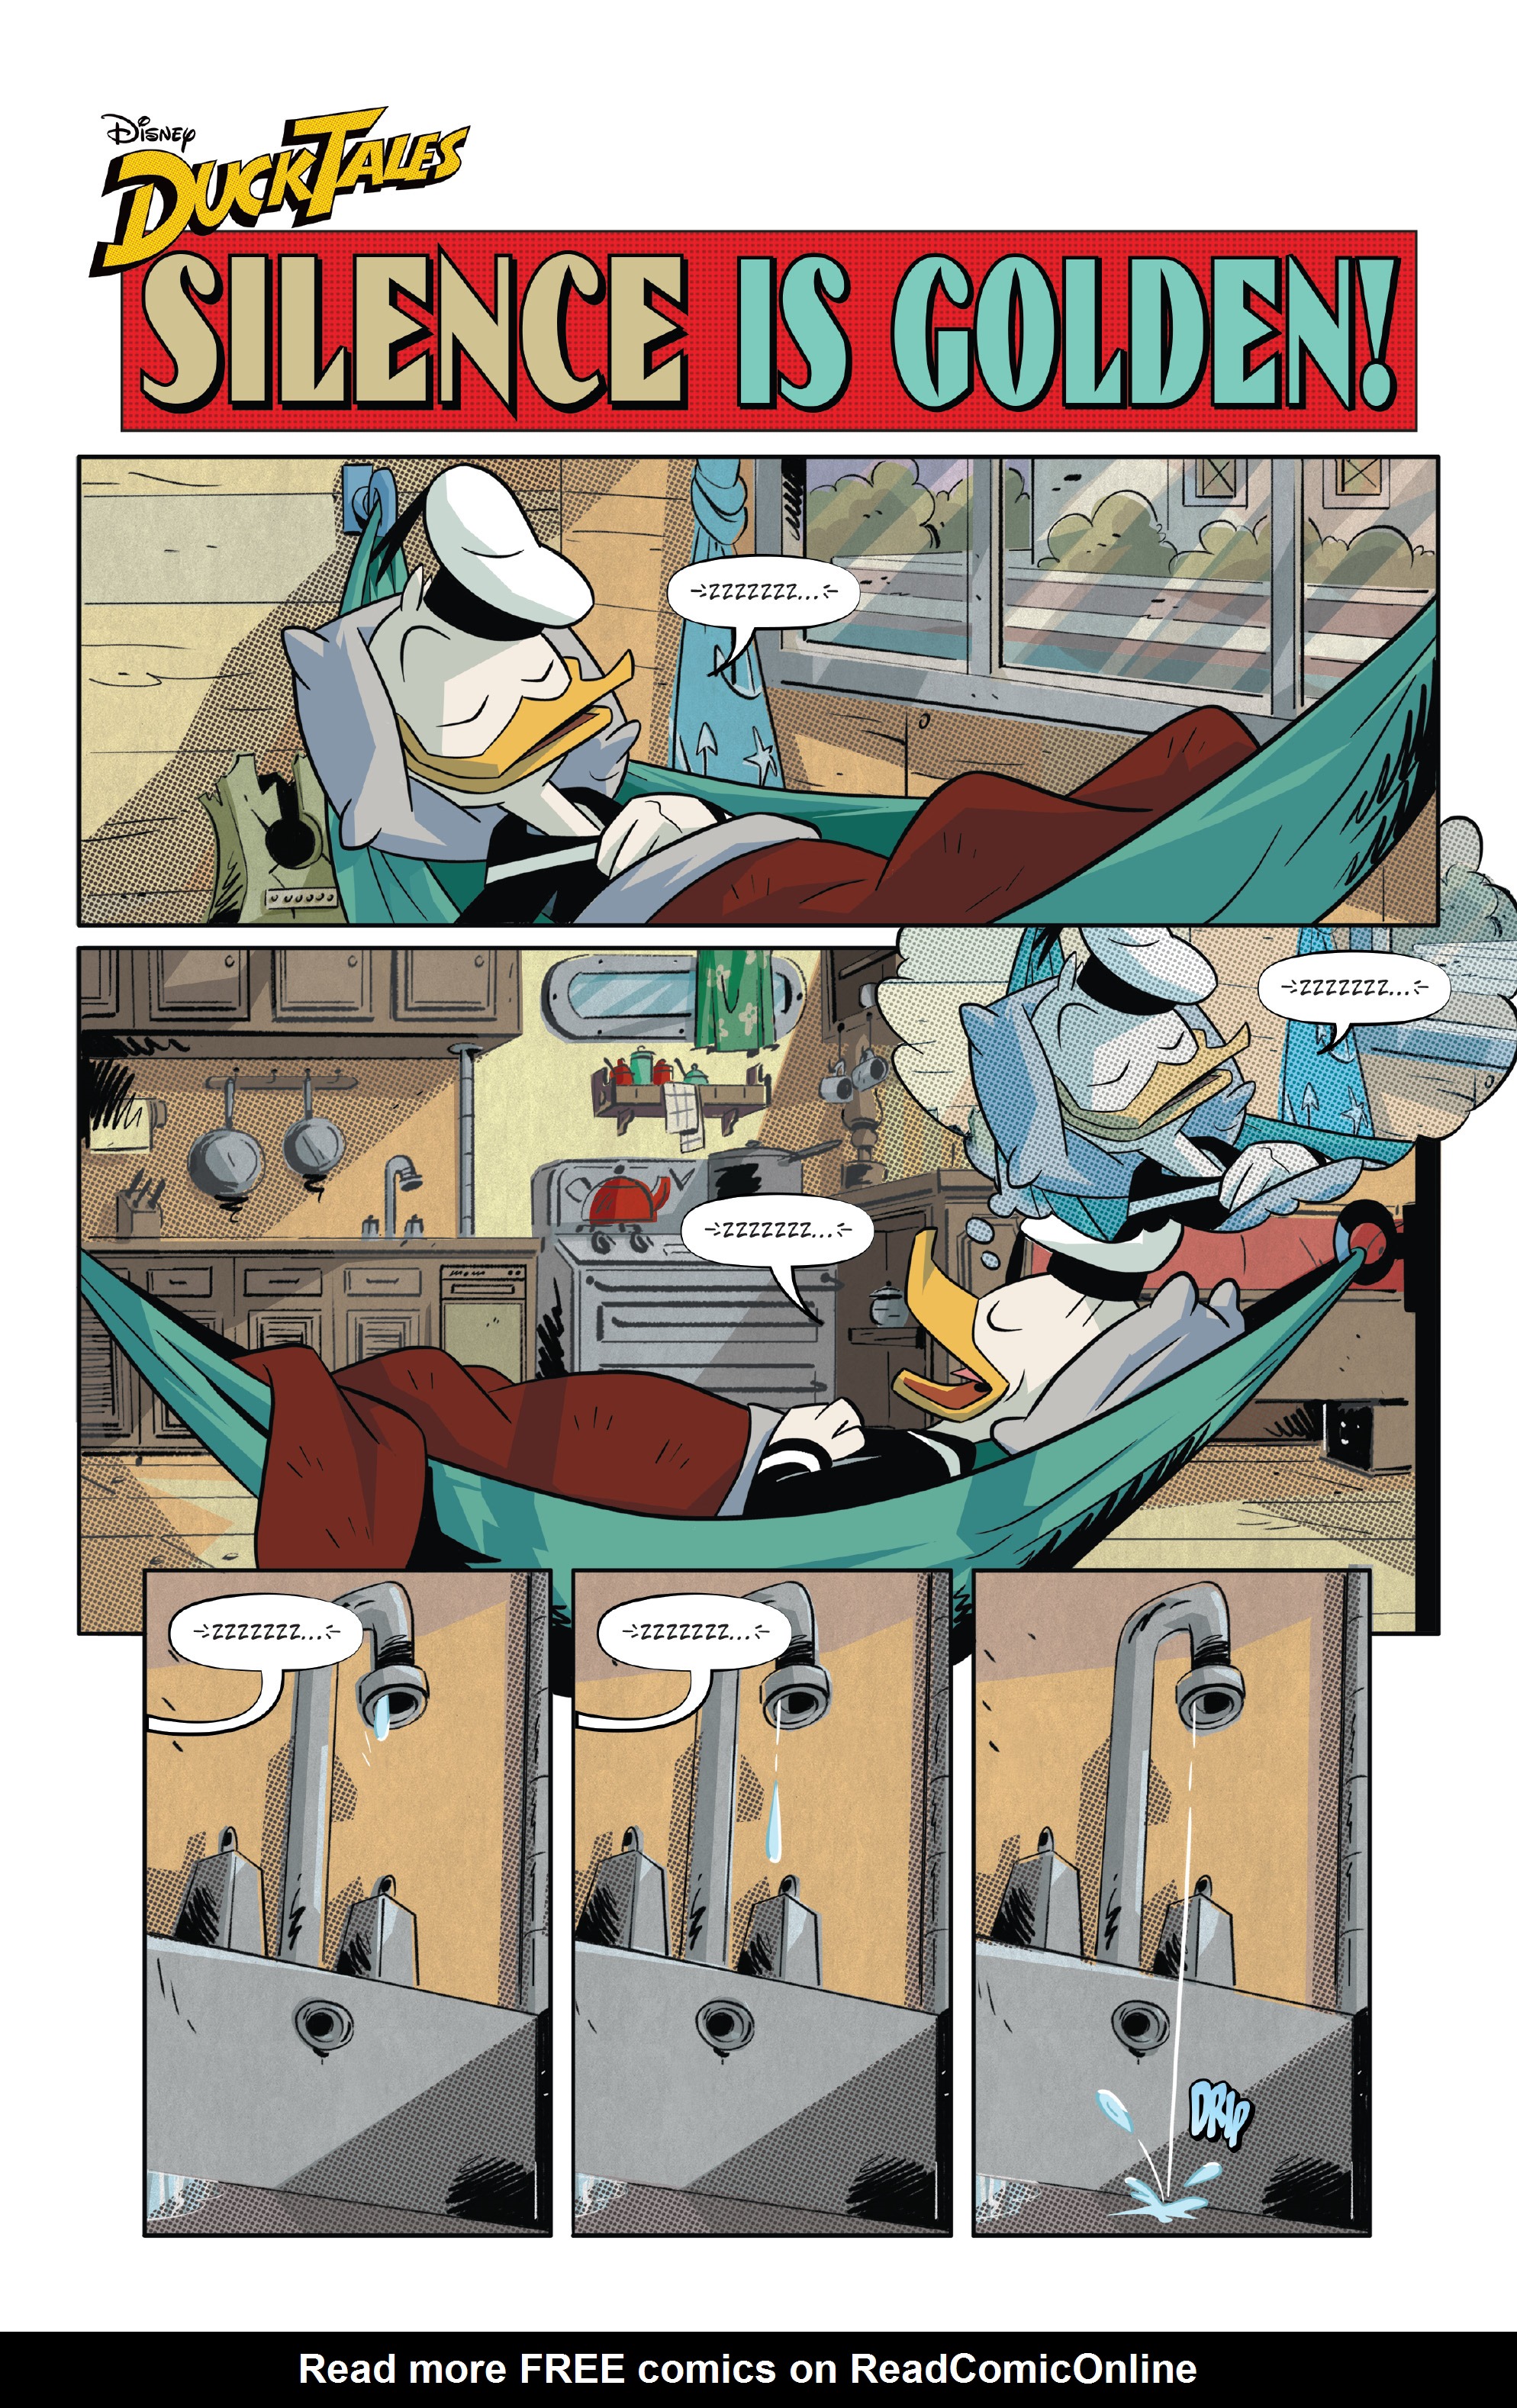 Read online DuckTales: Silence and Science comic -  Issue #1 - 3